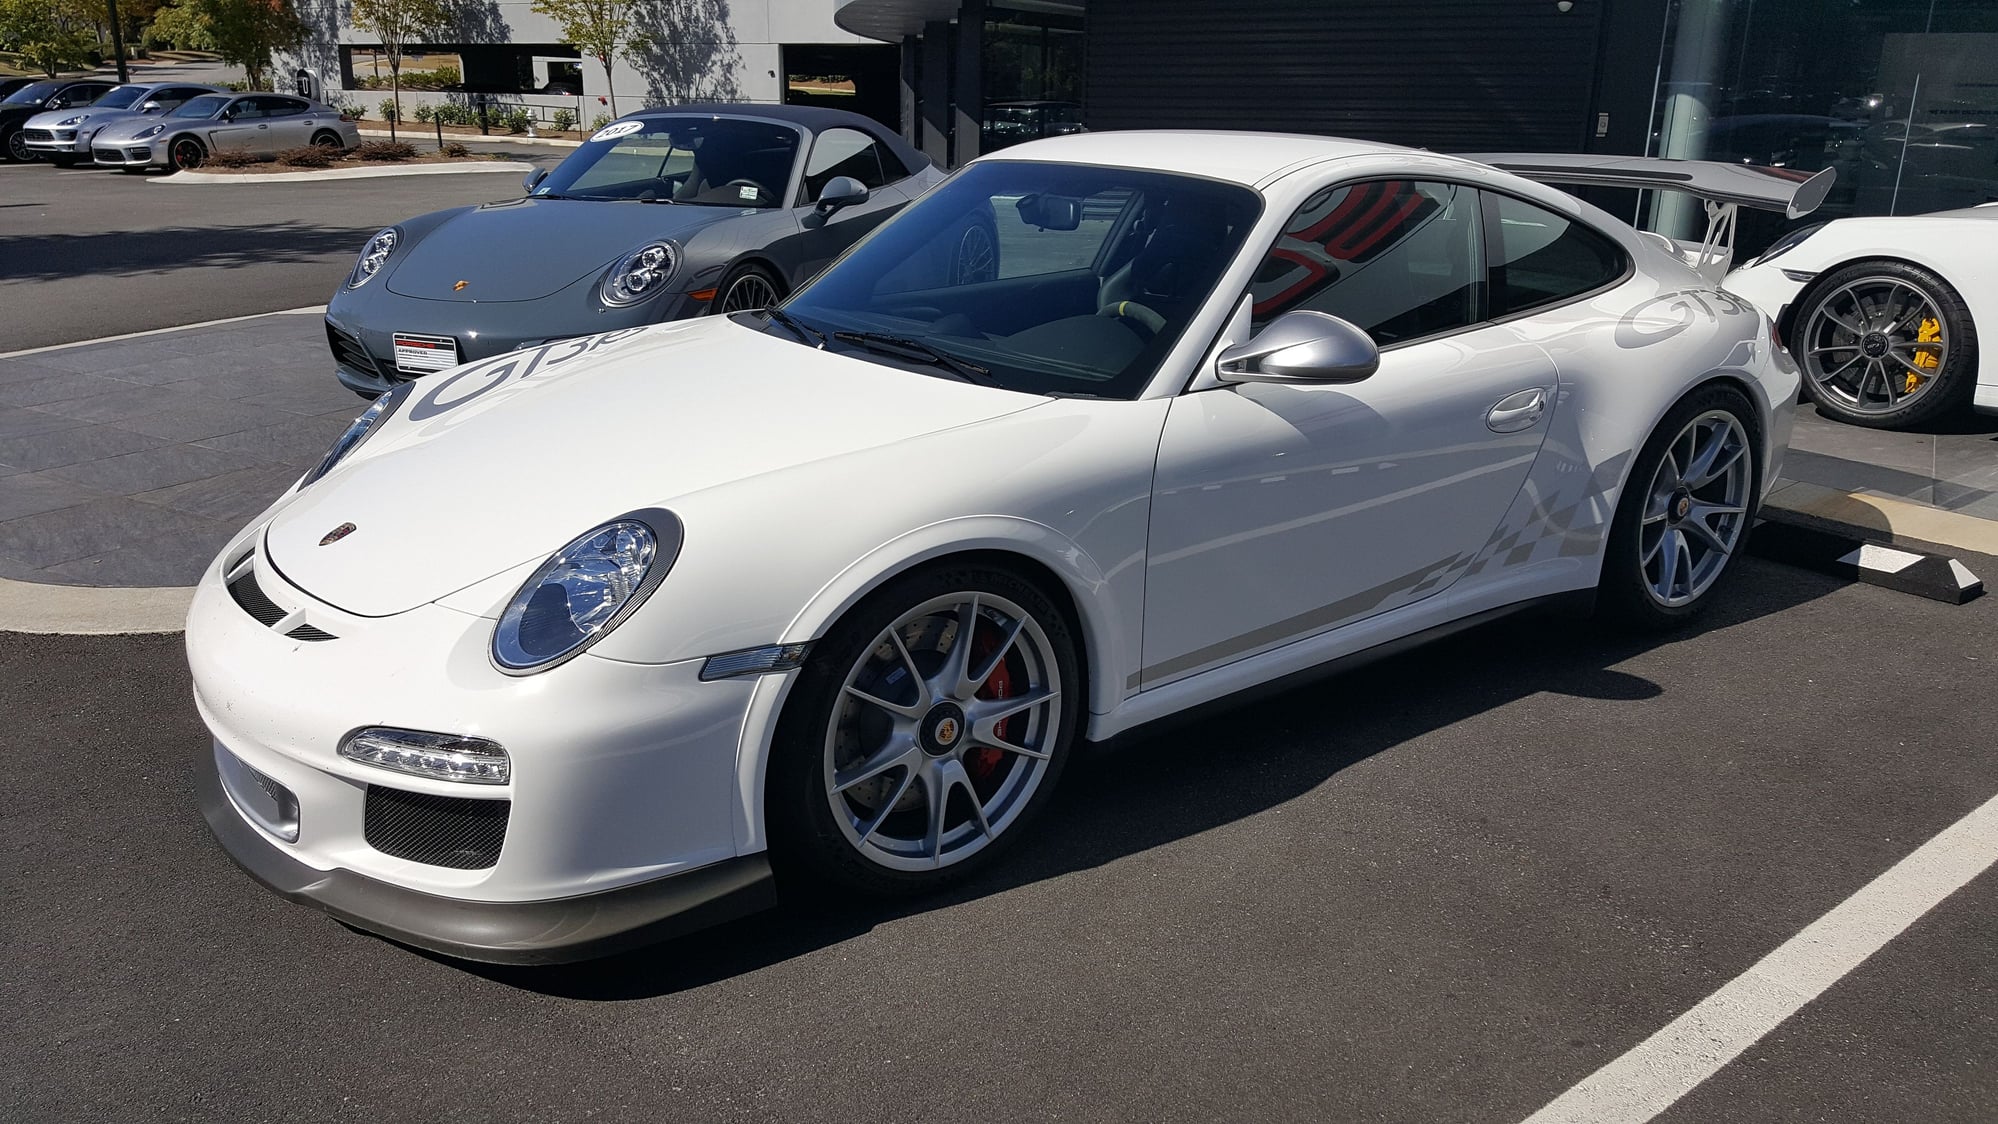 2010 Porsche GT3 - 2010 GT3RS 997.2 - Used - VIN WP0AC2A91AS783811 - 1 Miles - 6 cyl - 2WD - Manual - Coupe - White - Austin, TX 78733, United States